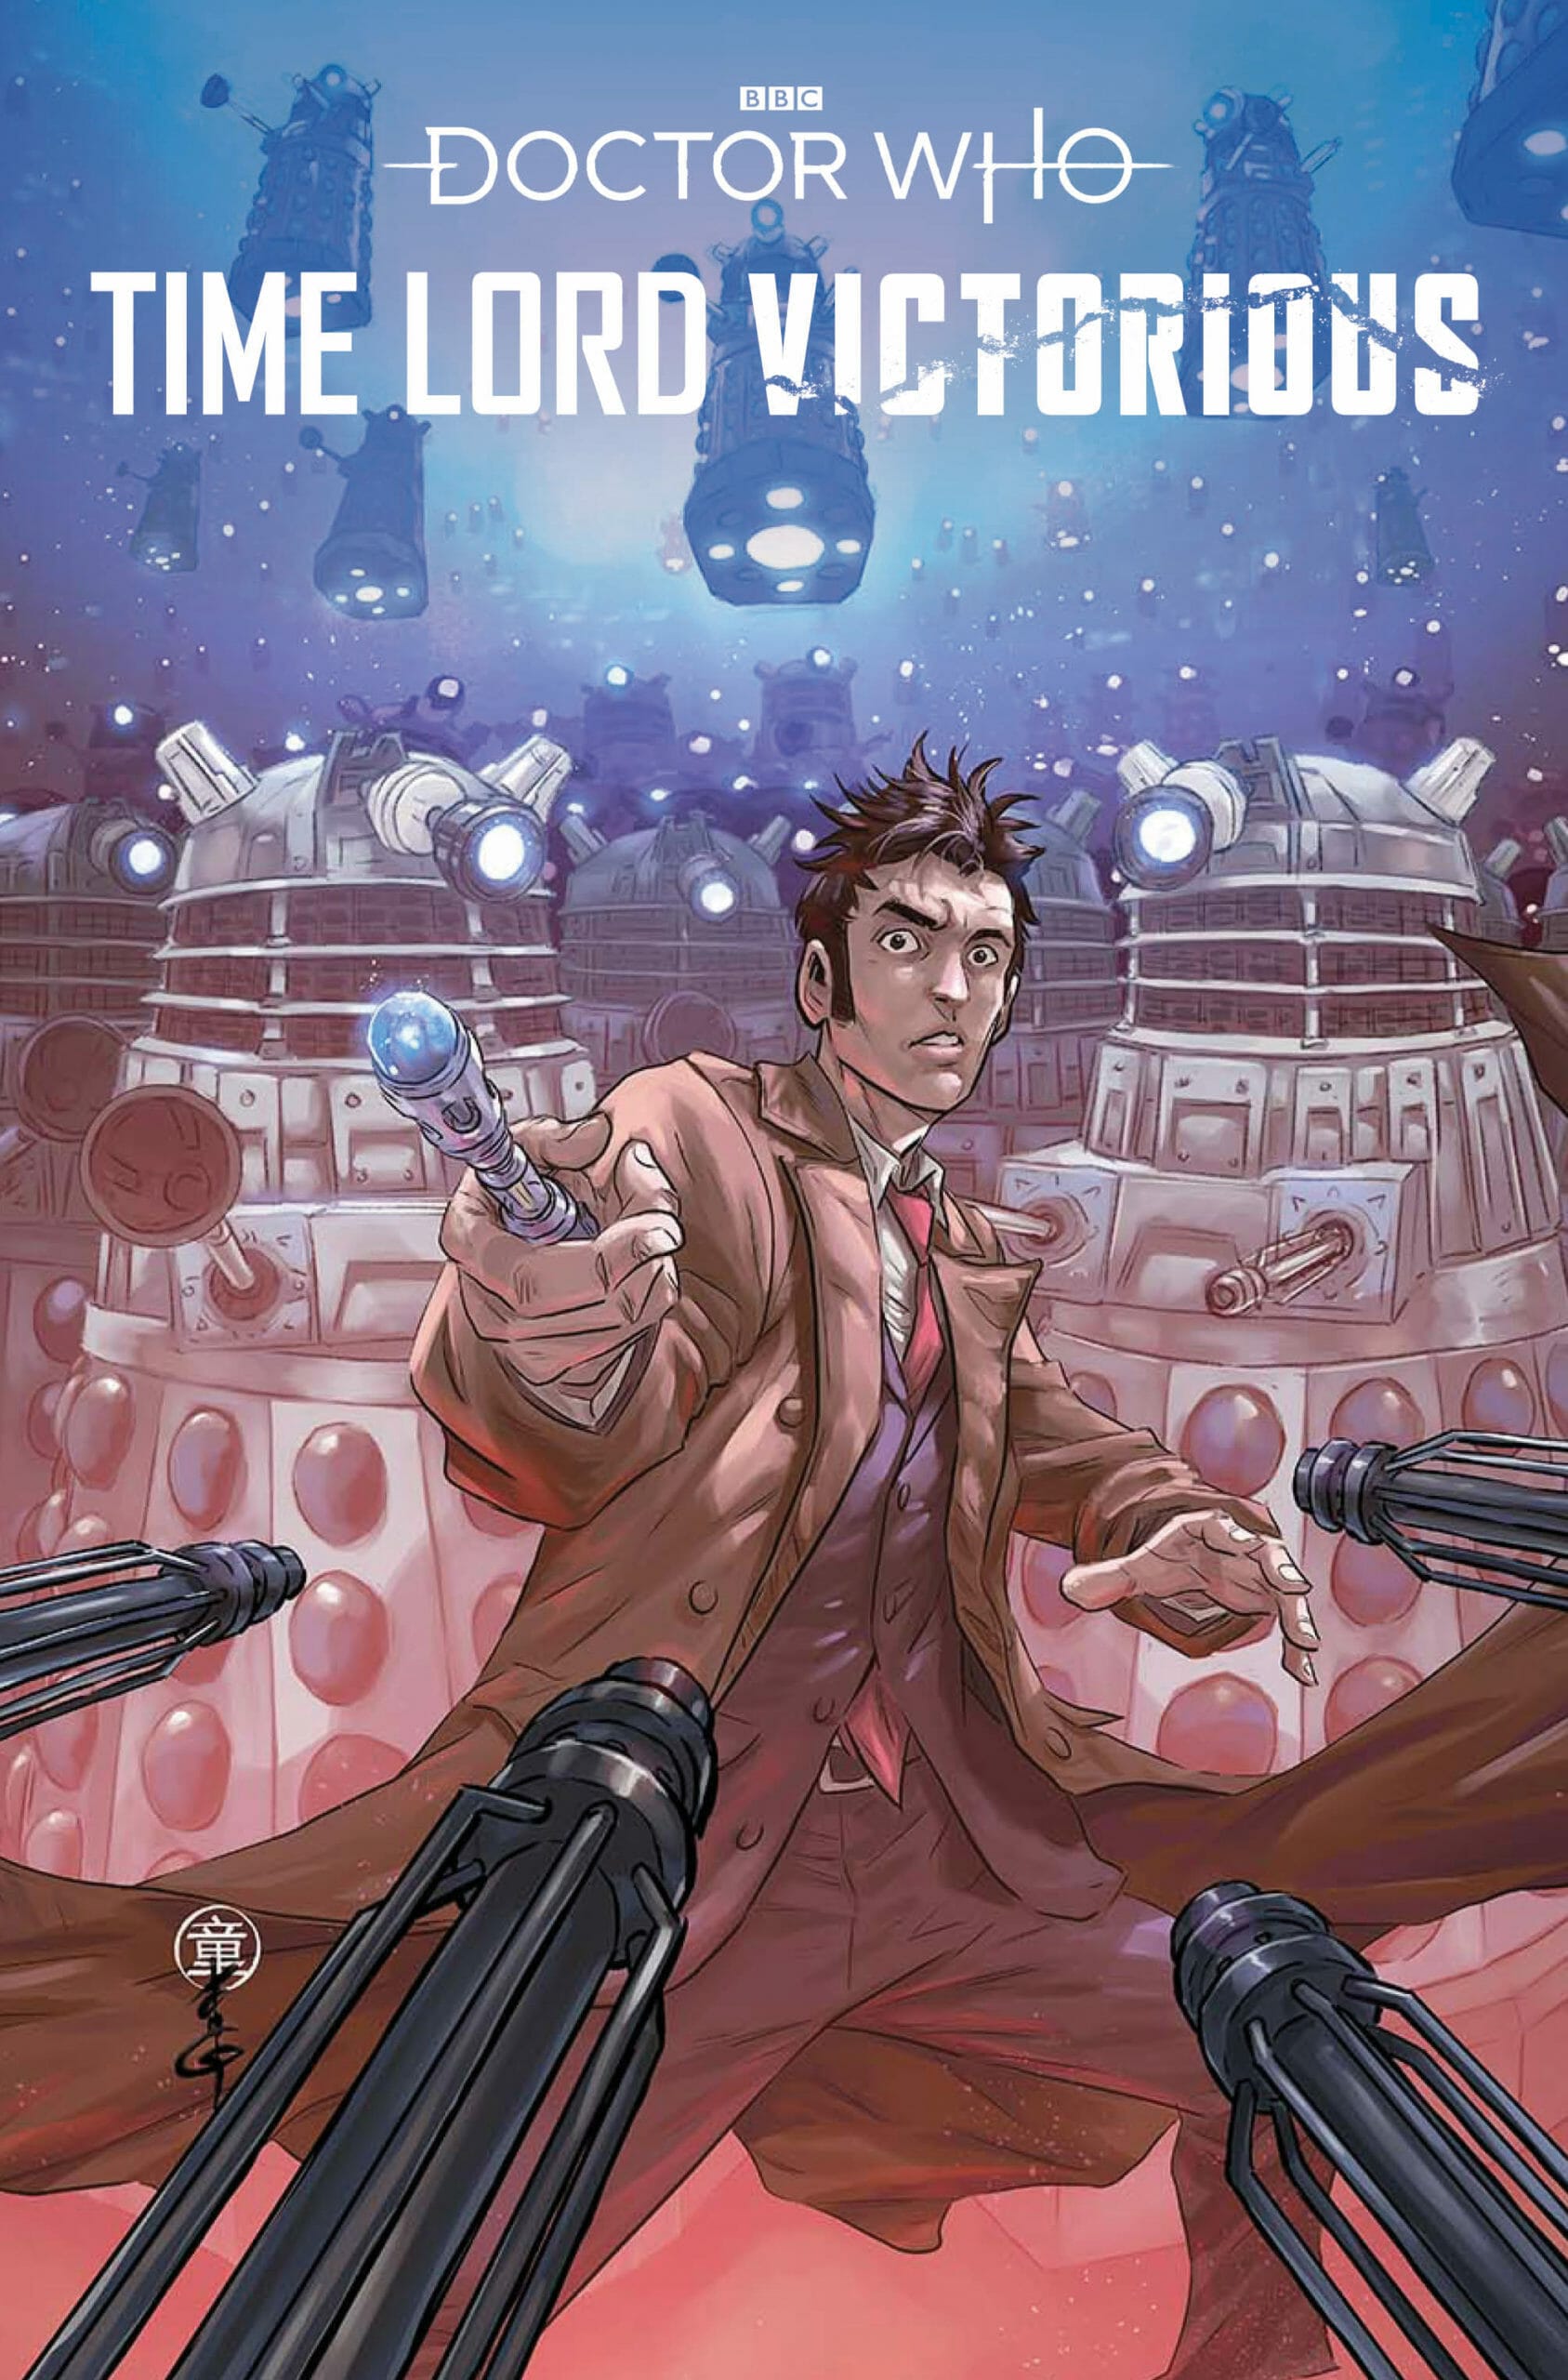 Time Lord Victorious #1 covers